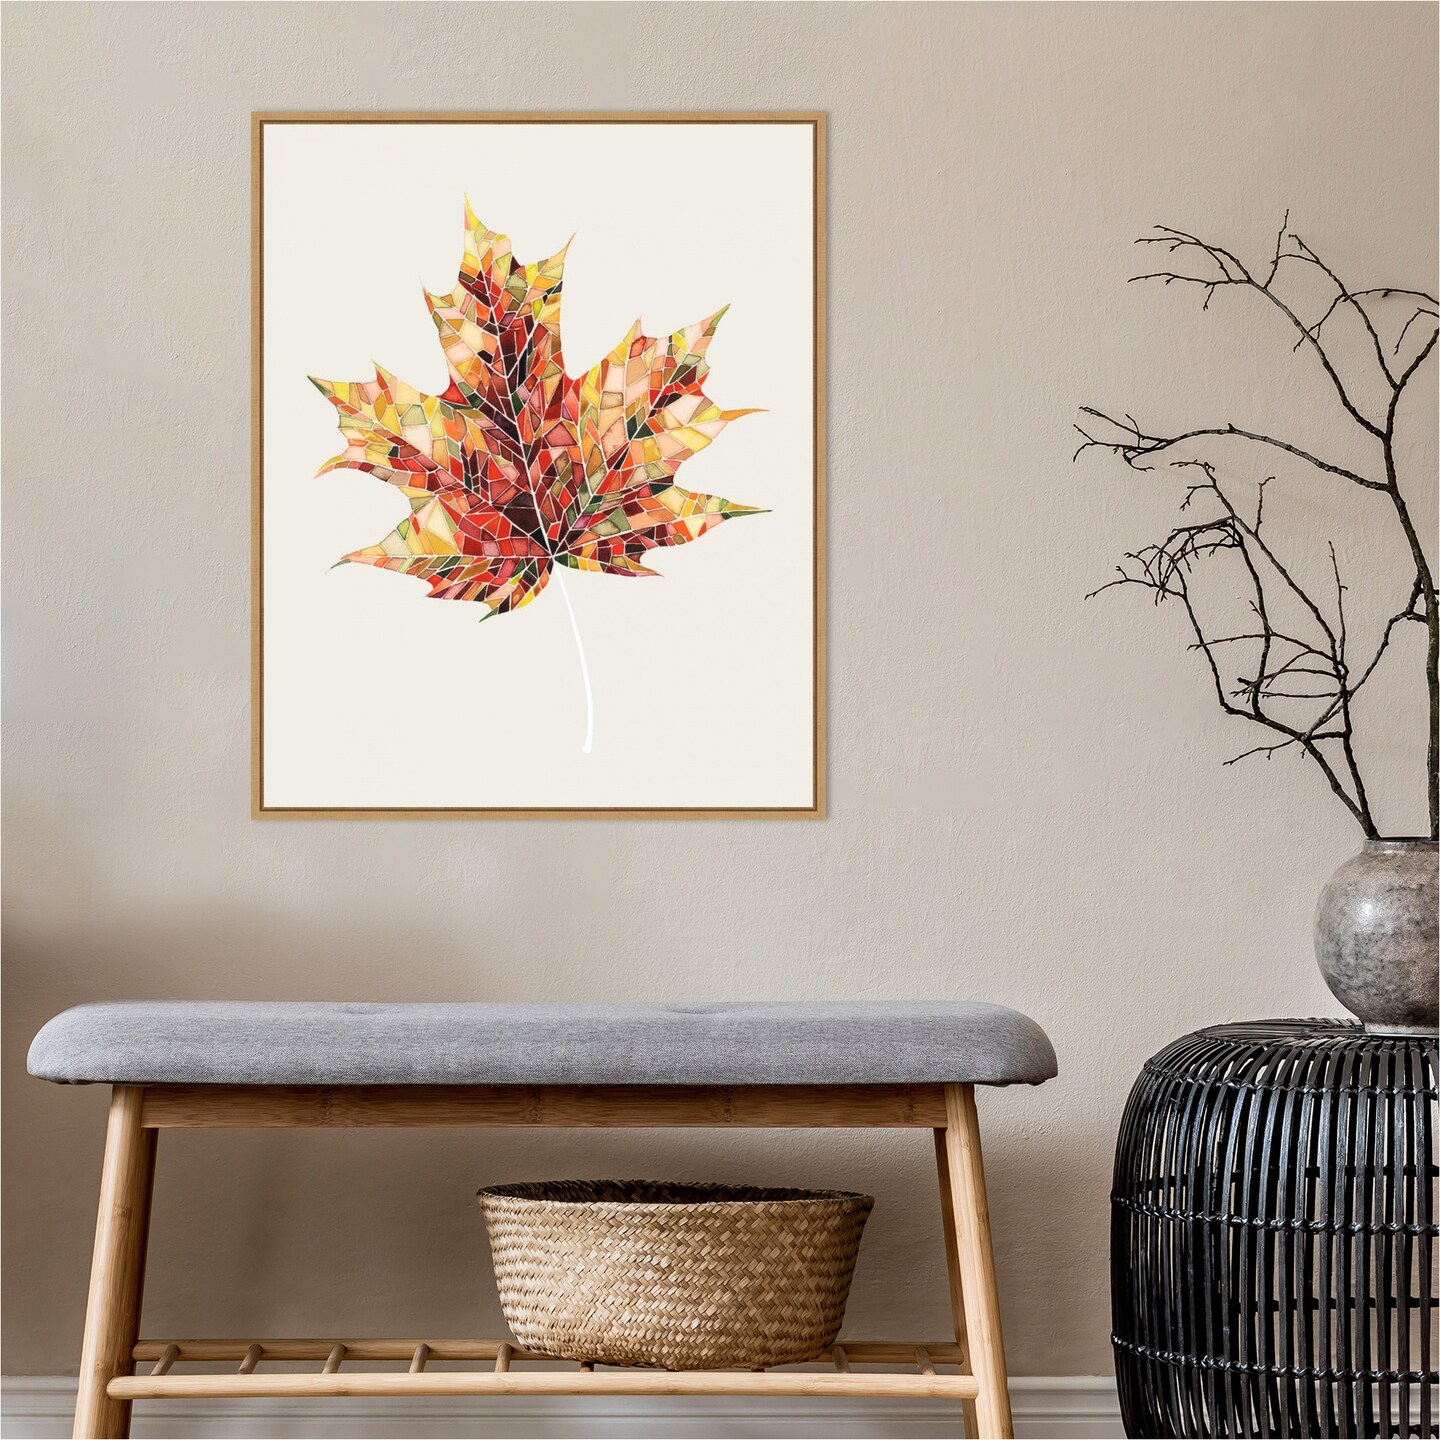 Fall Mosaic Leaf III by Grace Popp 23-in. W x 28-in. H. Canvas Wall Art Print Framed in Natural